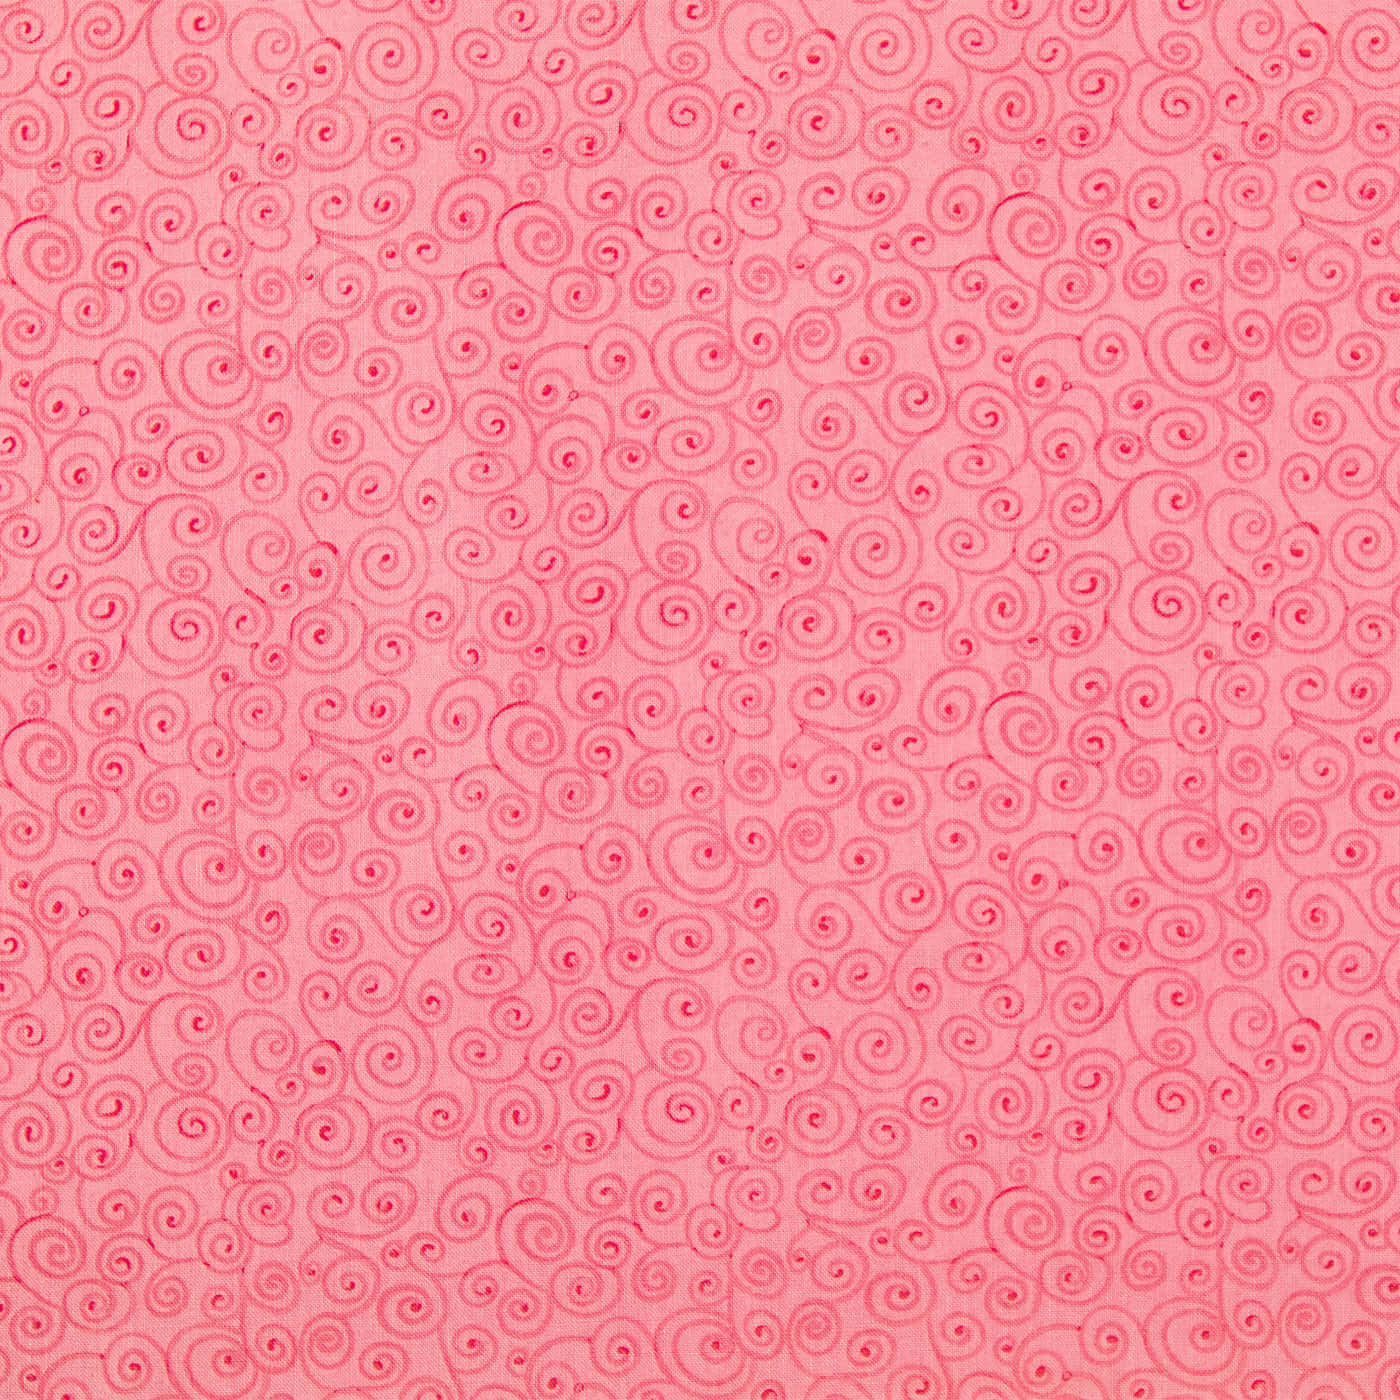 Abstract Swirls - A Captivating Combination of Pink and White